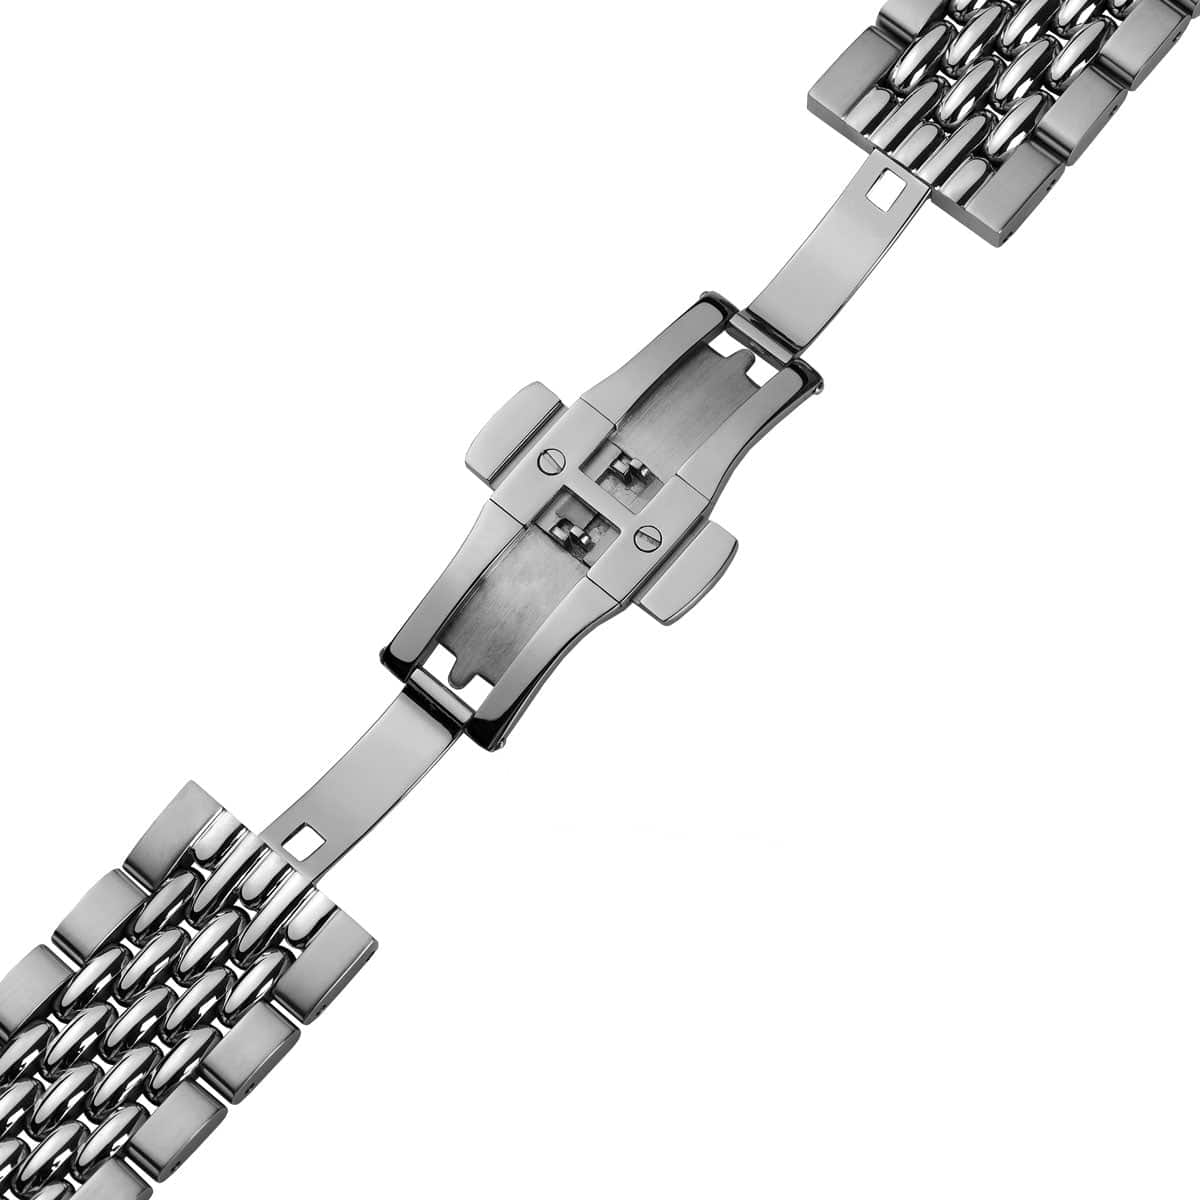 Butterfly Beads of Rice Premium Watch Strap - Polished / Brushed